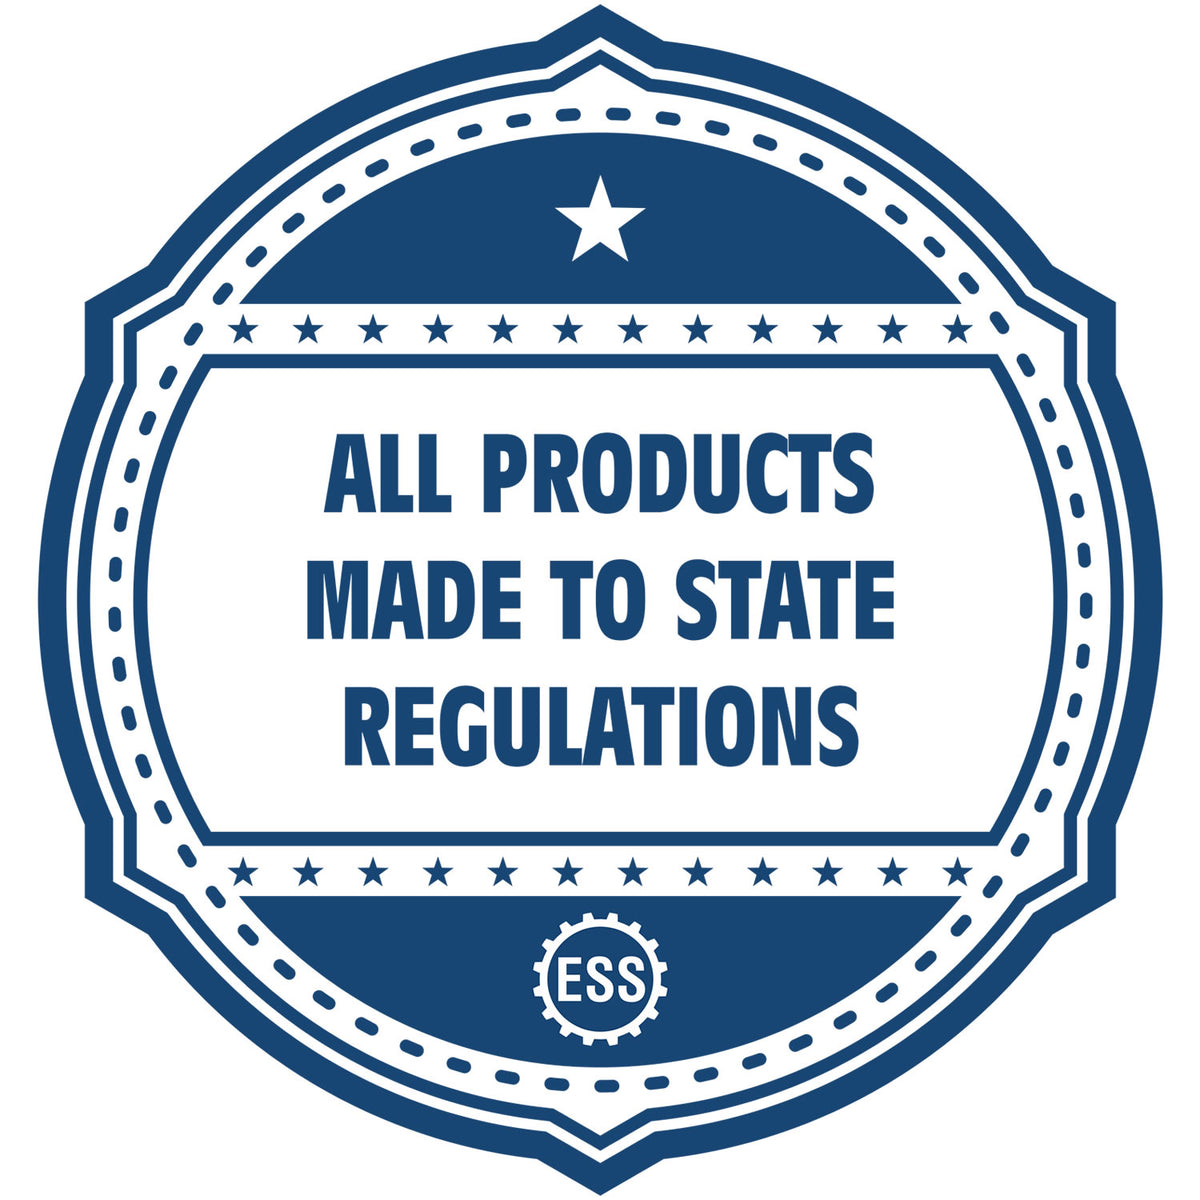 An icon or badge element for the PSI Colorado Notary Stamp showing that this product is made in compliance with state regulations.